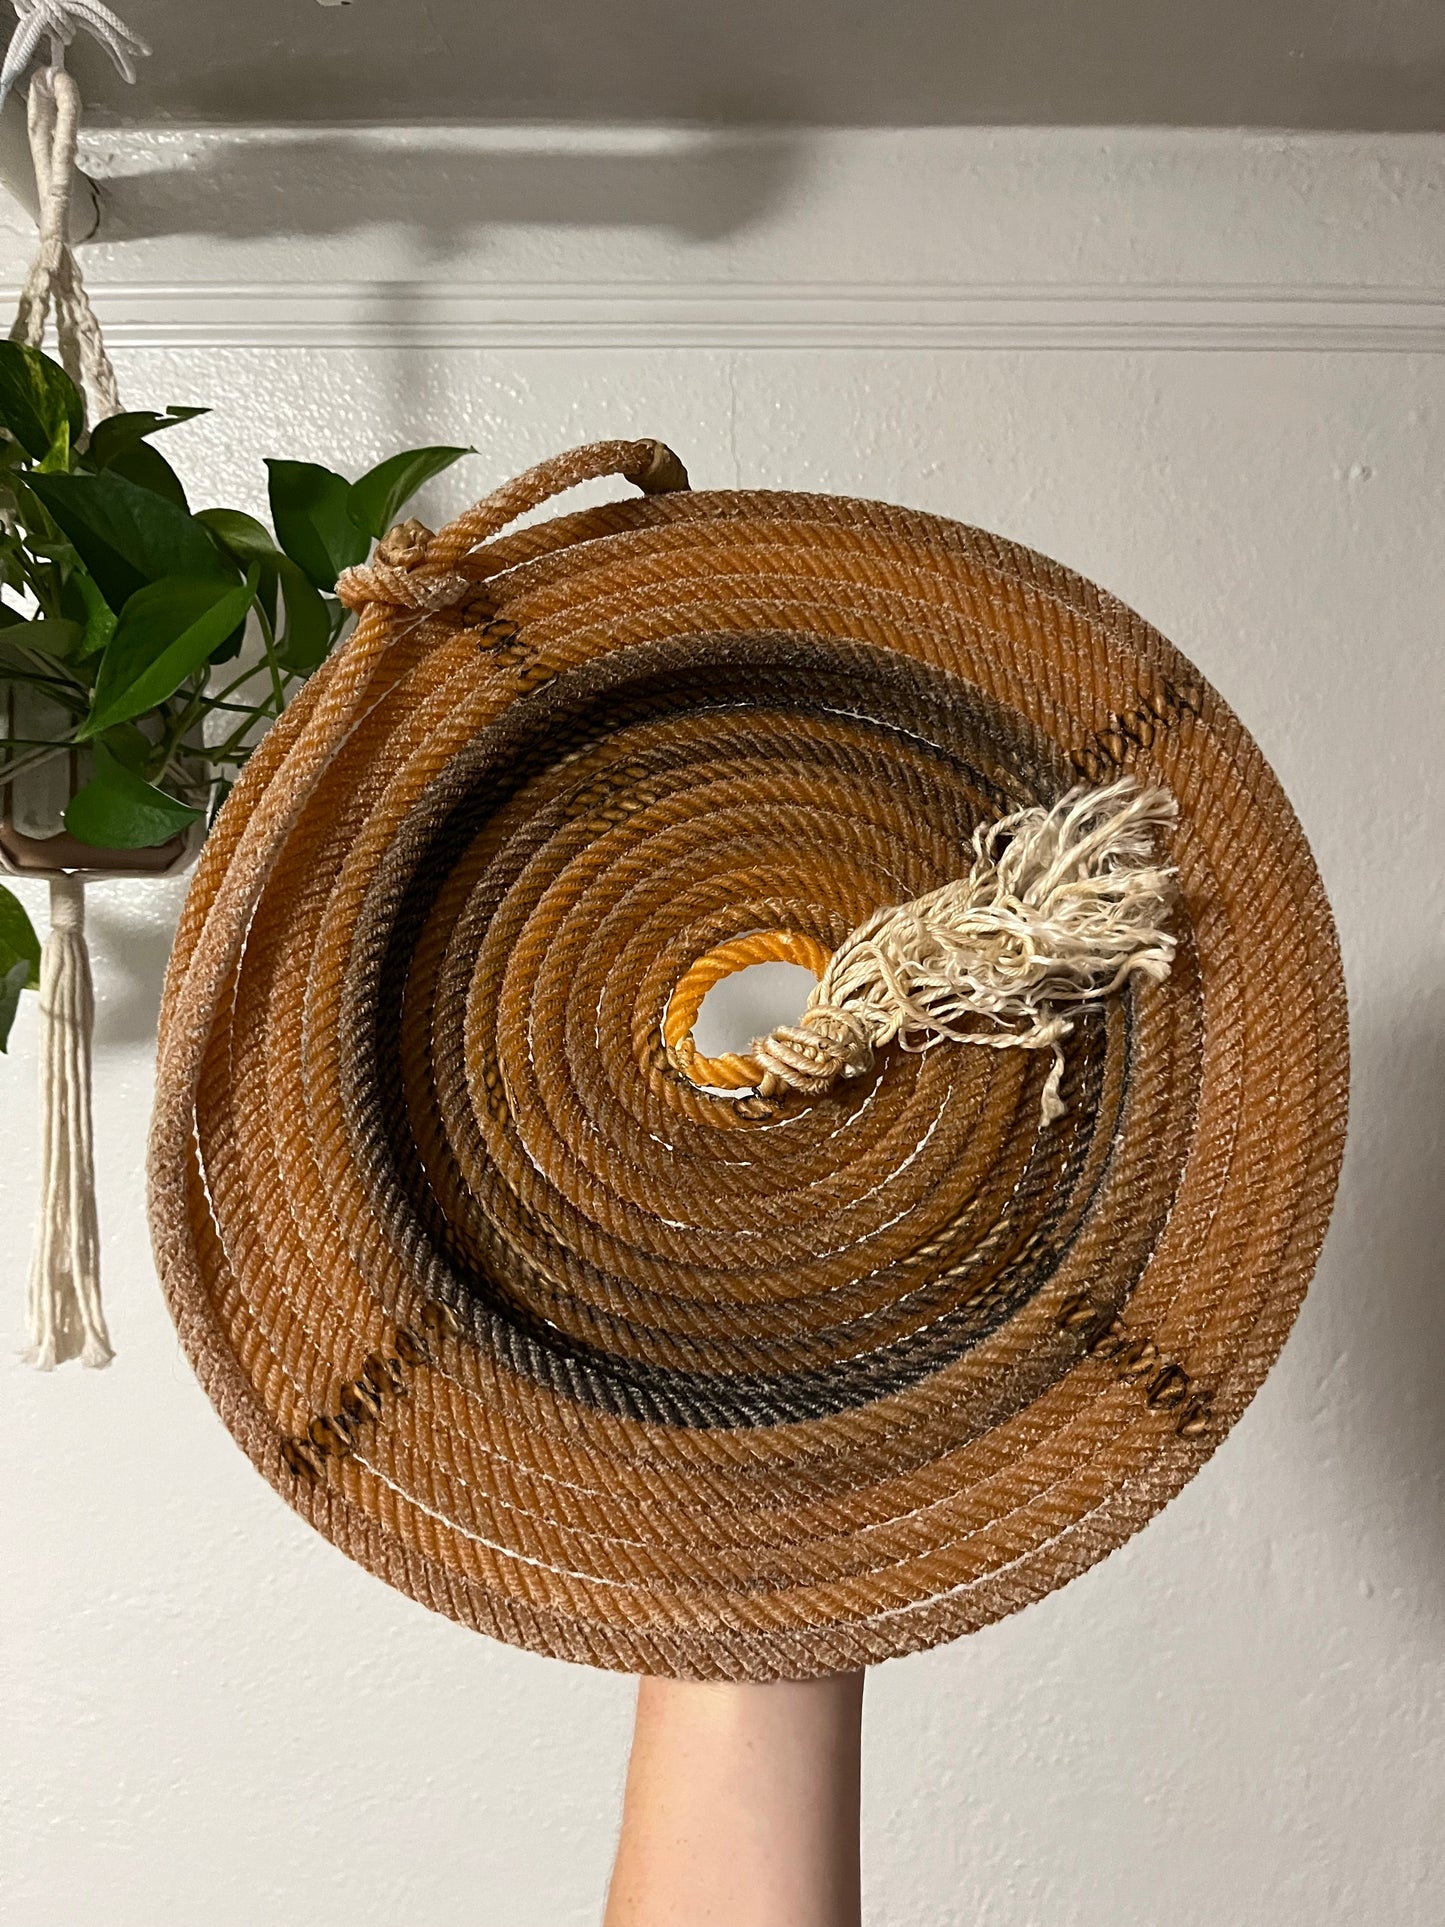 Orange Decorative Flat Rope Basket Artist: Aleah Russell  Recycled lariat rope  Rope came from a working ranch in Wyoming.  Authentic and hand crafted by the artist  Shallow rope basket with slight brim and tassel in center  Put some wild west on a counter or nightstand to add a bit of flare  Would make a nice fruit basket  Add a bowl inside for holding small items  14" long x 14" high x 3" wide